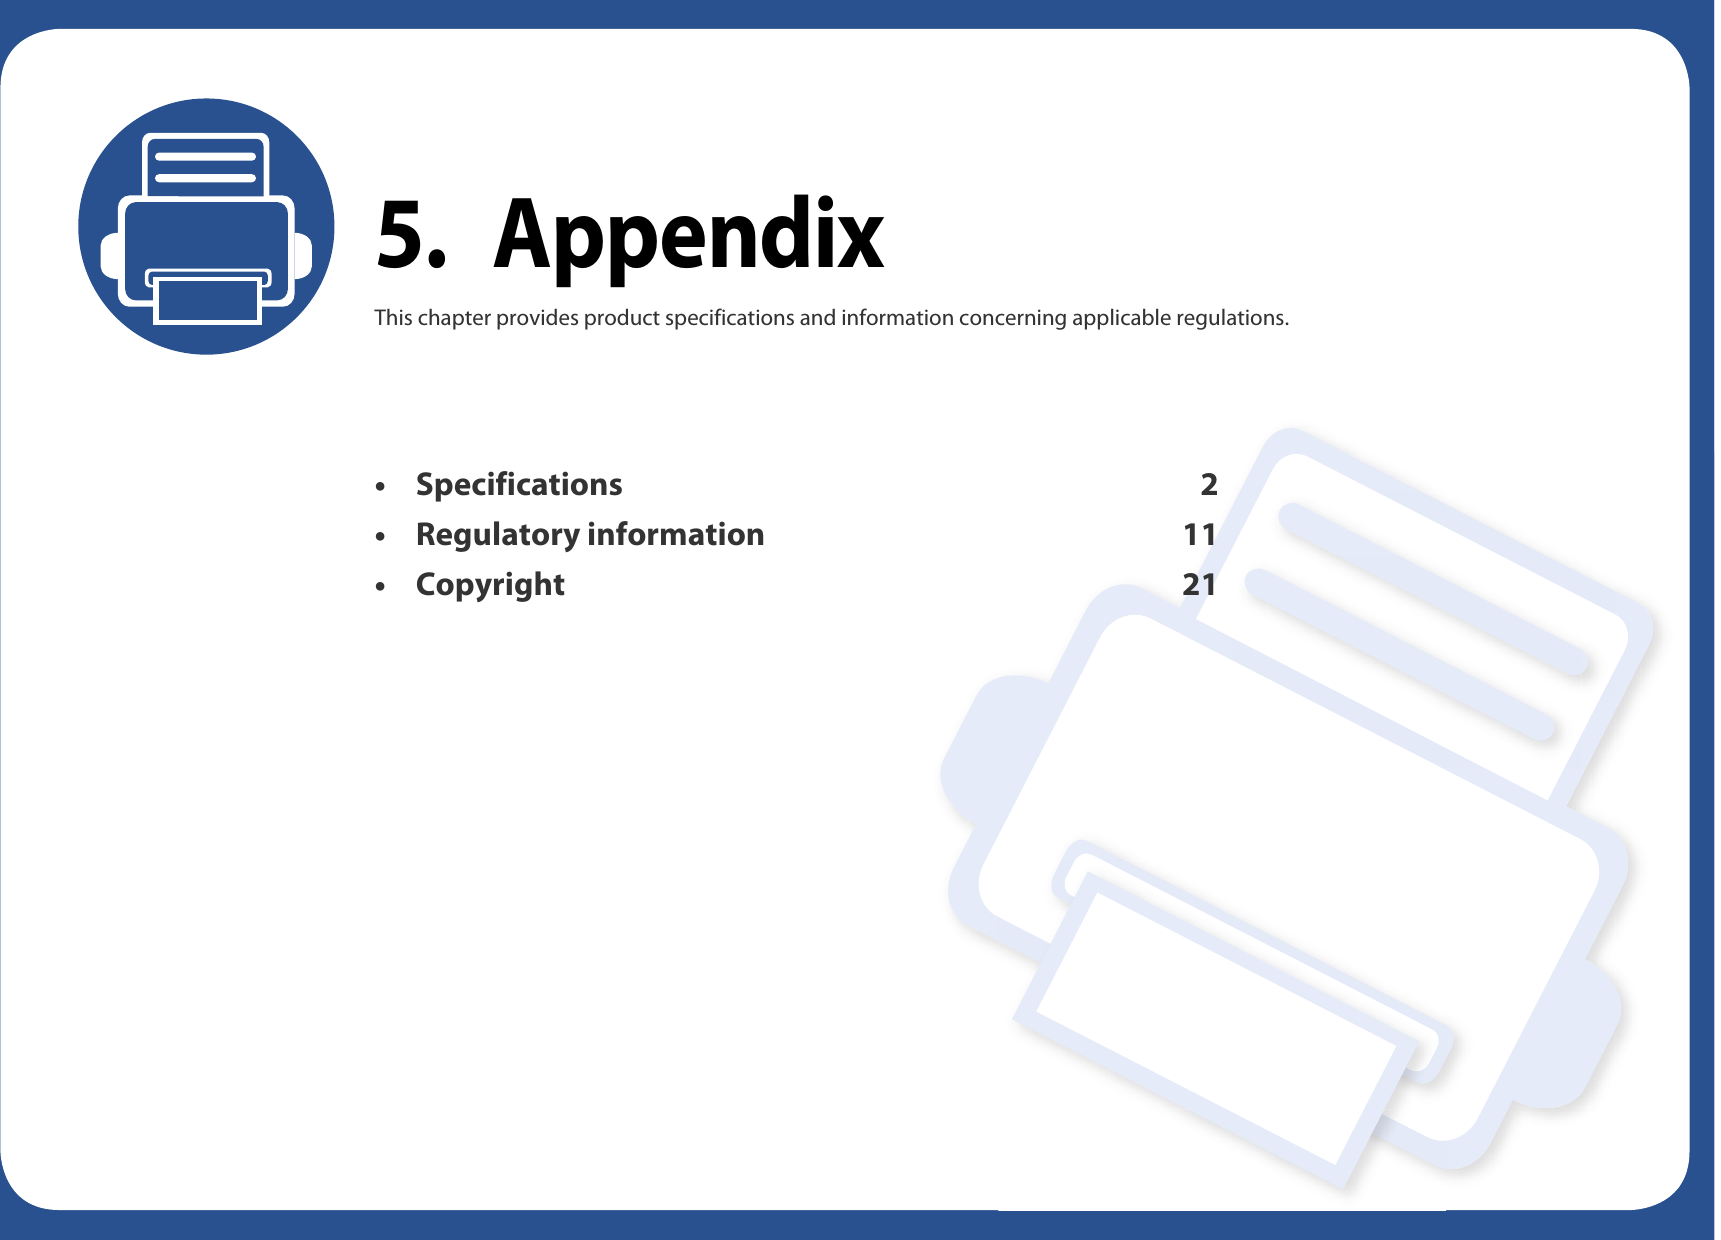 5. AppendixThis chapter provides product specifications and information concerning applicable regulations.•Specifications 2• Regulatory information 11•Copyright 21